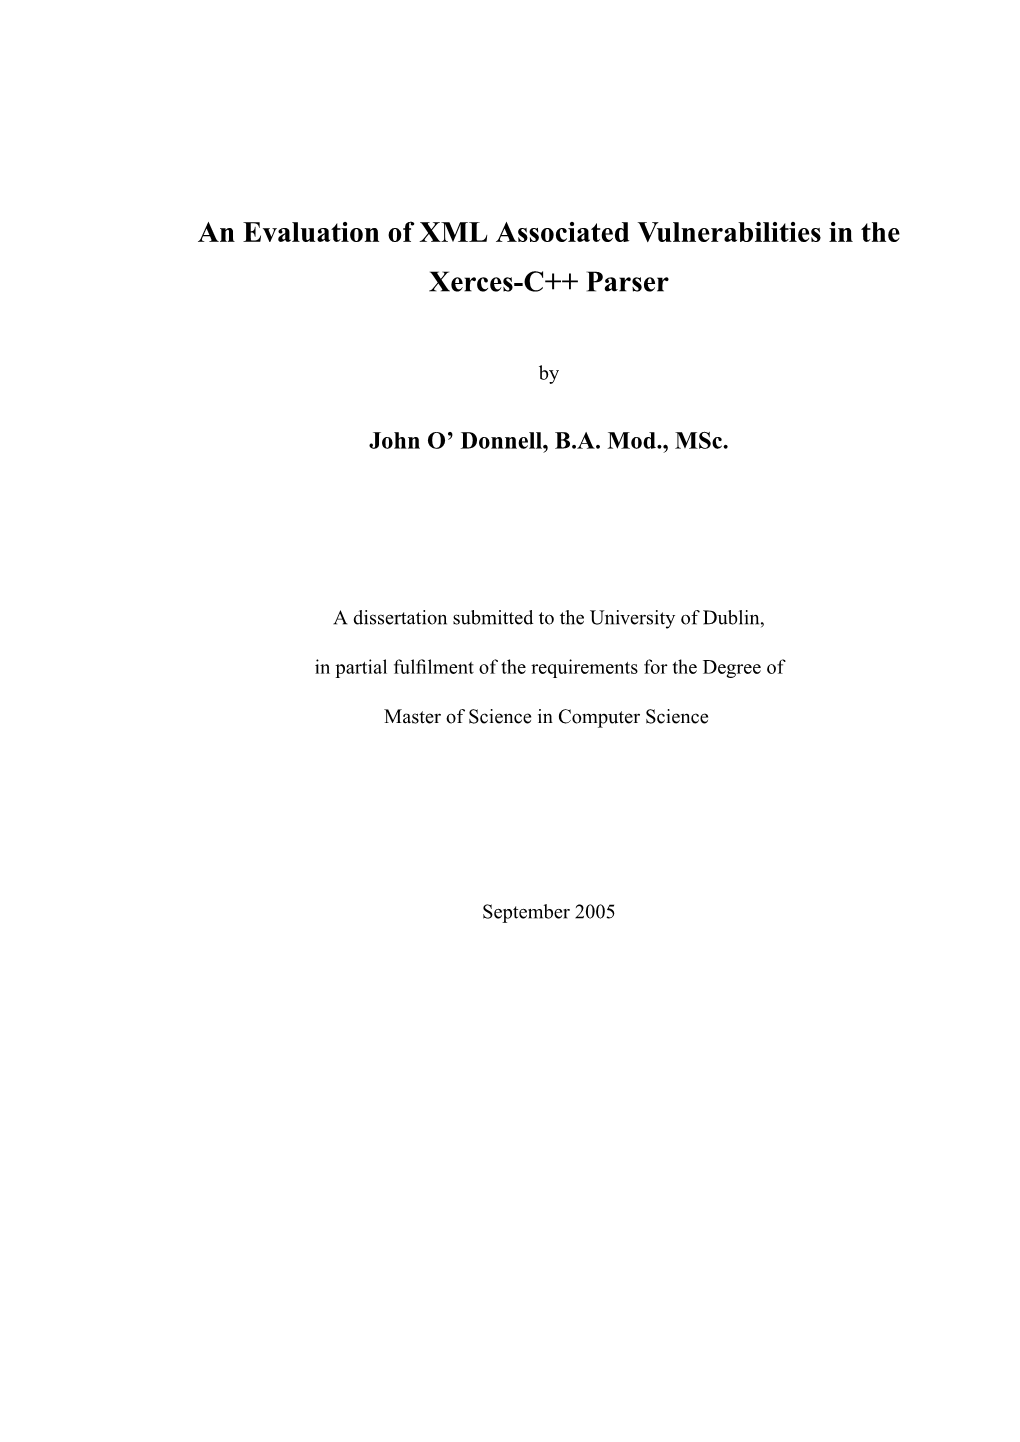 An Evaluation of XML Associated Vulnerabilities in the Xerces-C++ Parser